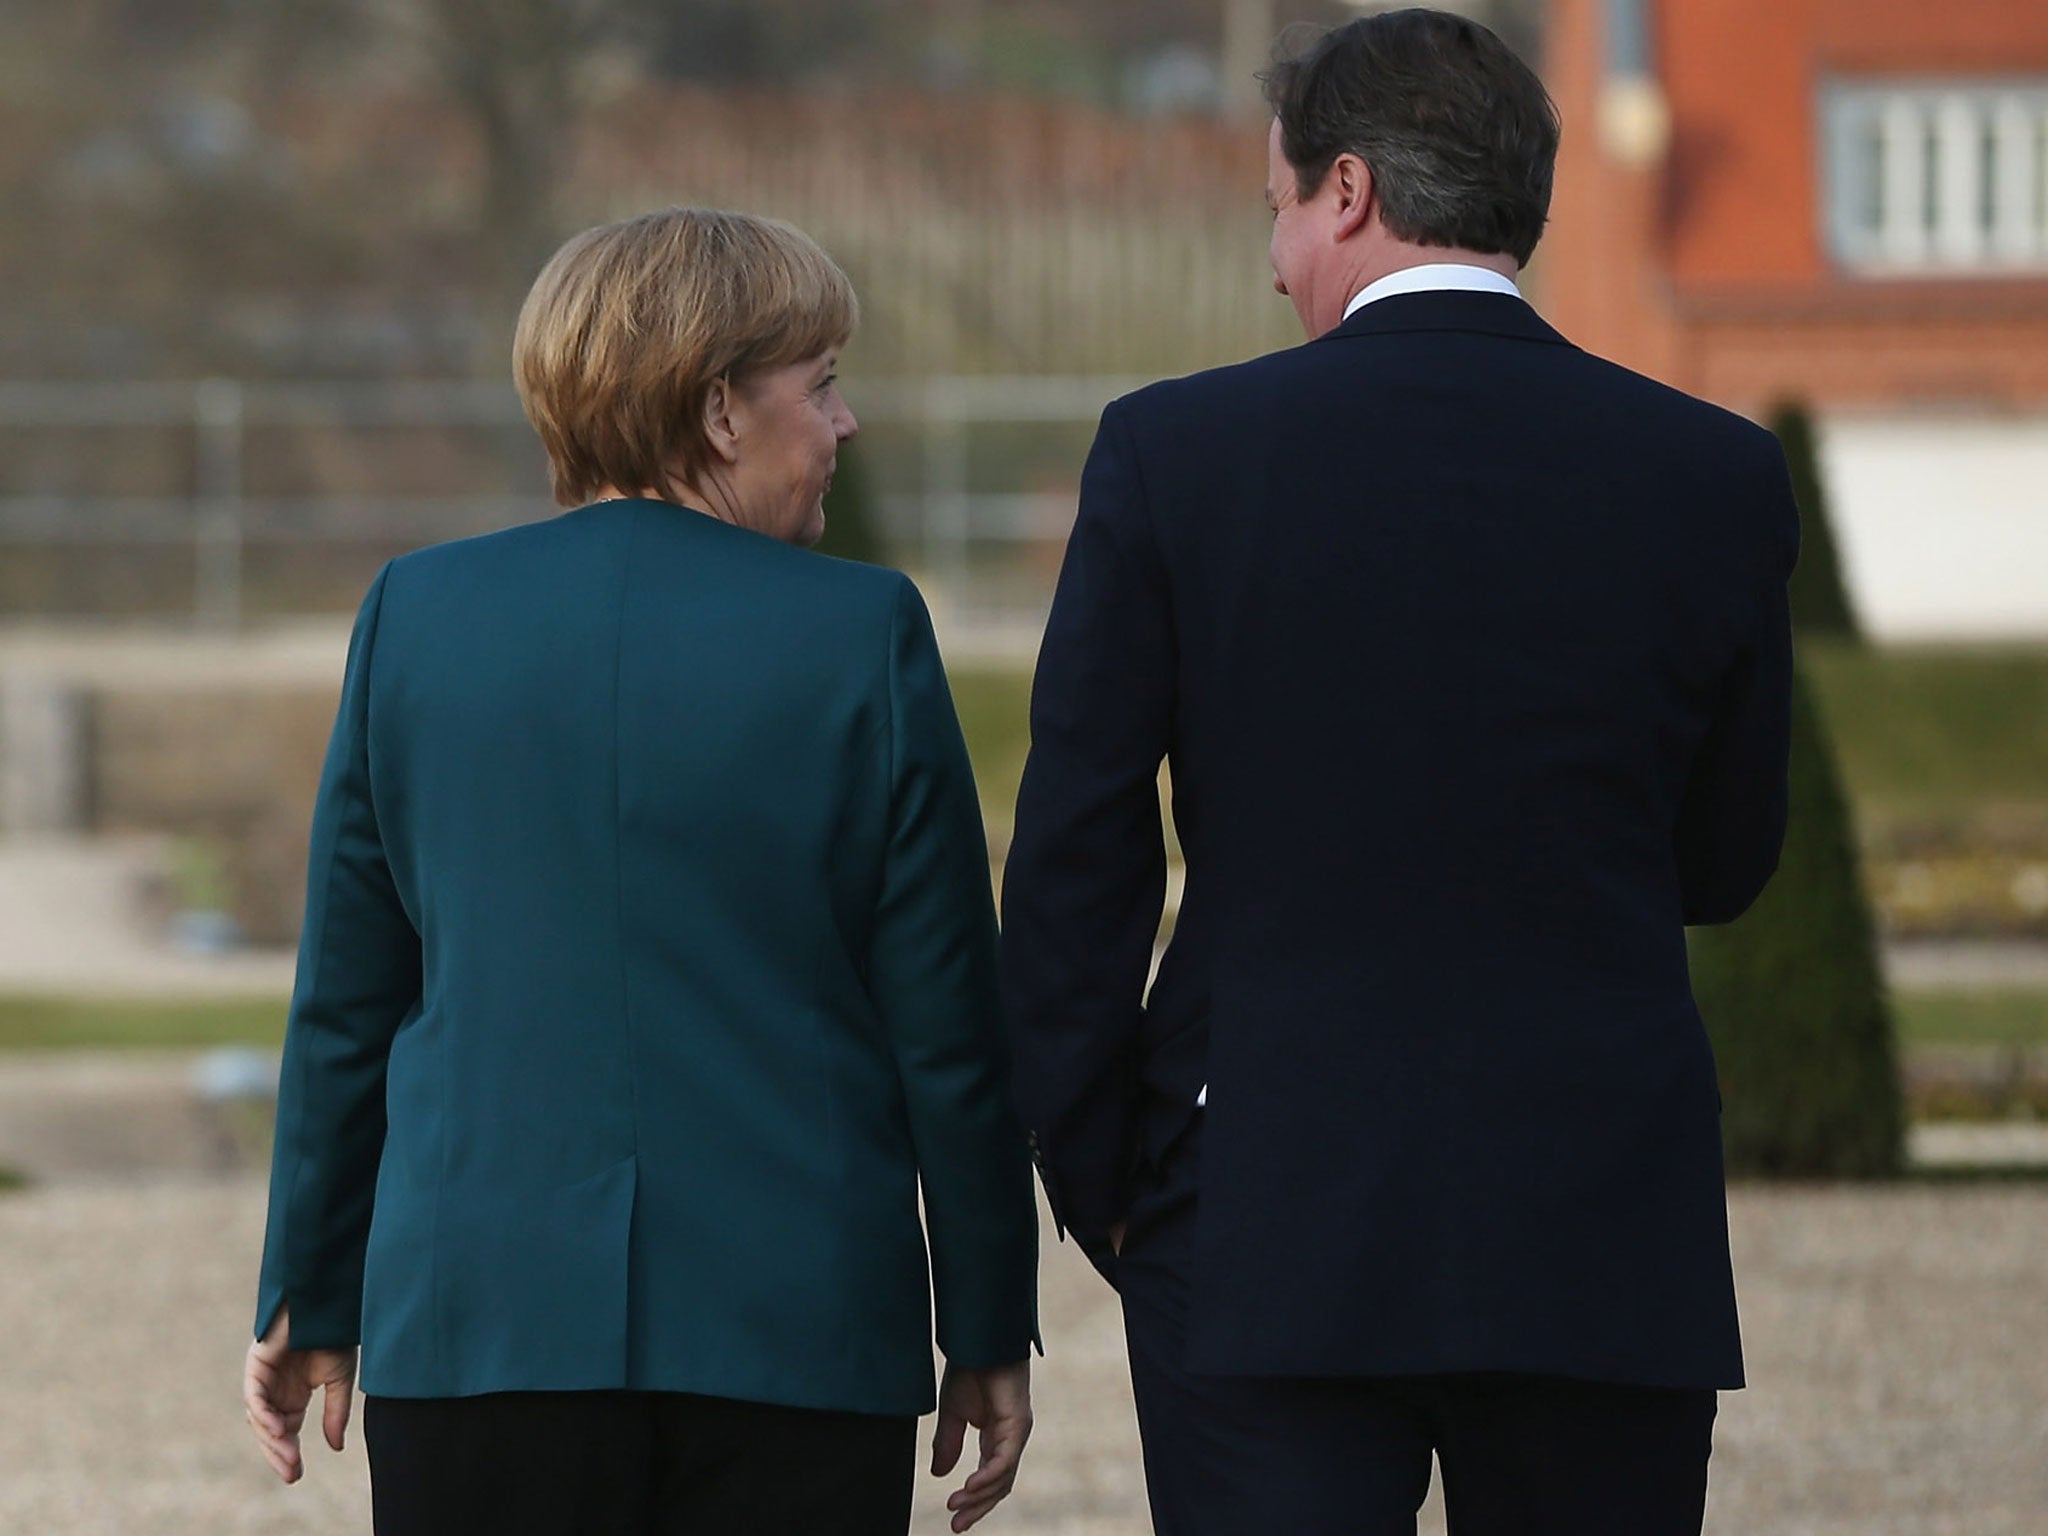 It may be possible for the Prime Minister to come to some agreement with Angela Merkel over the EU that could be presented as a diplomatic triumph back home